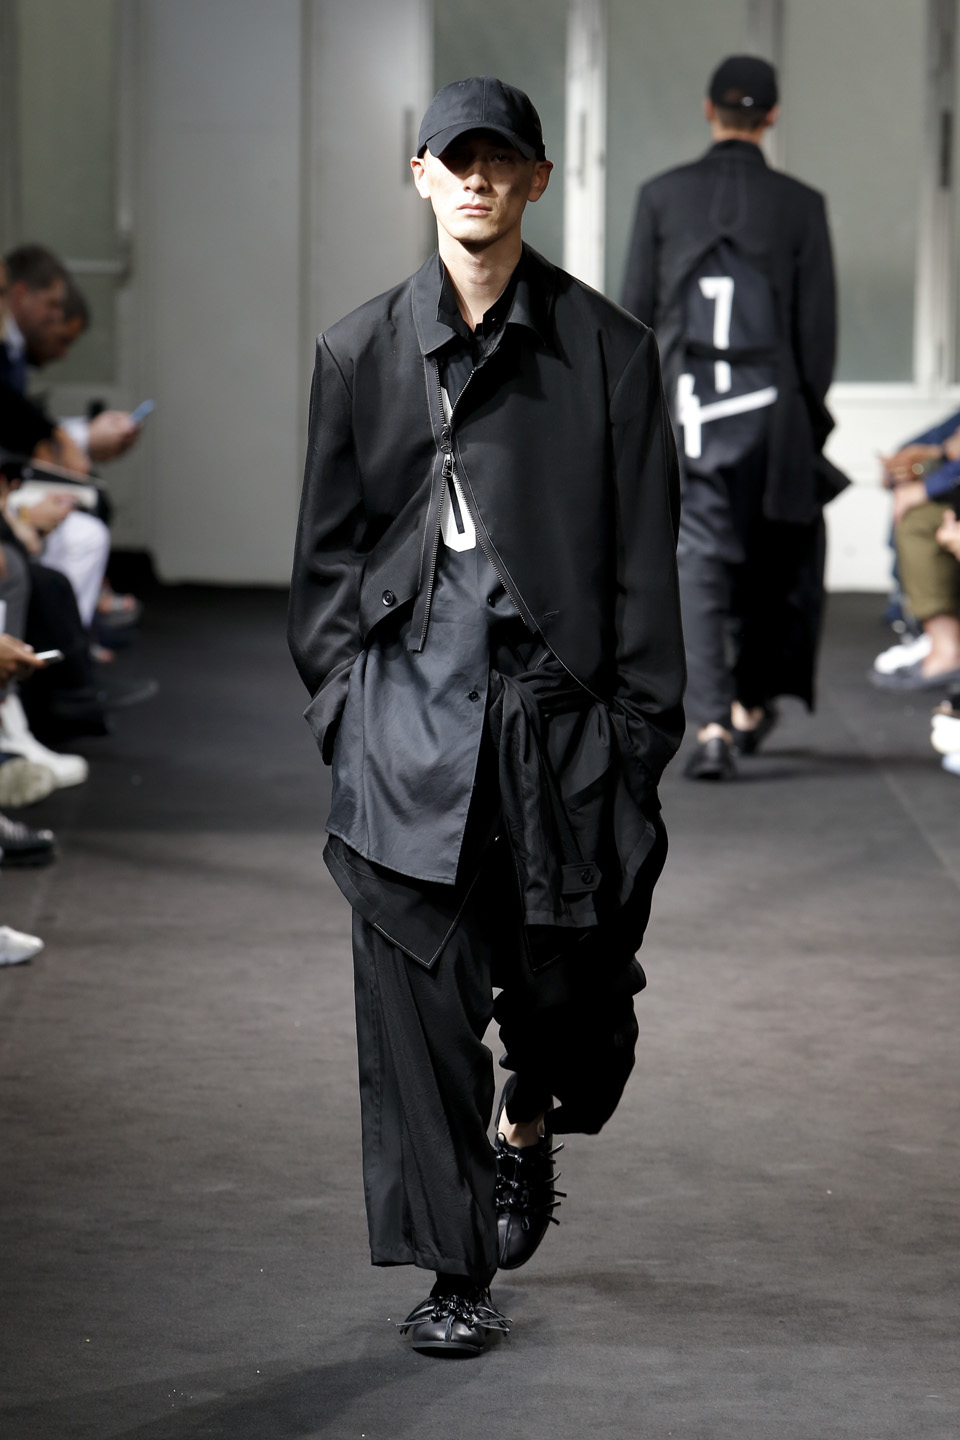 Yohji Yamamoto Presents Eclectic Graphic Tailoring for SS19